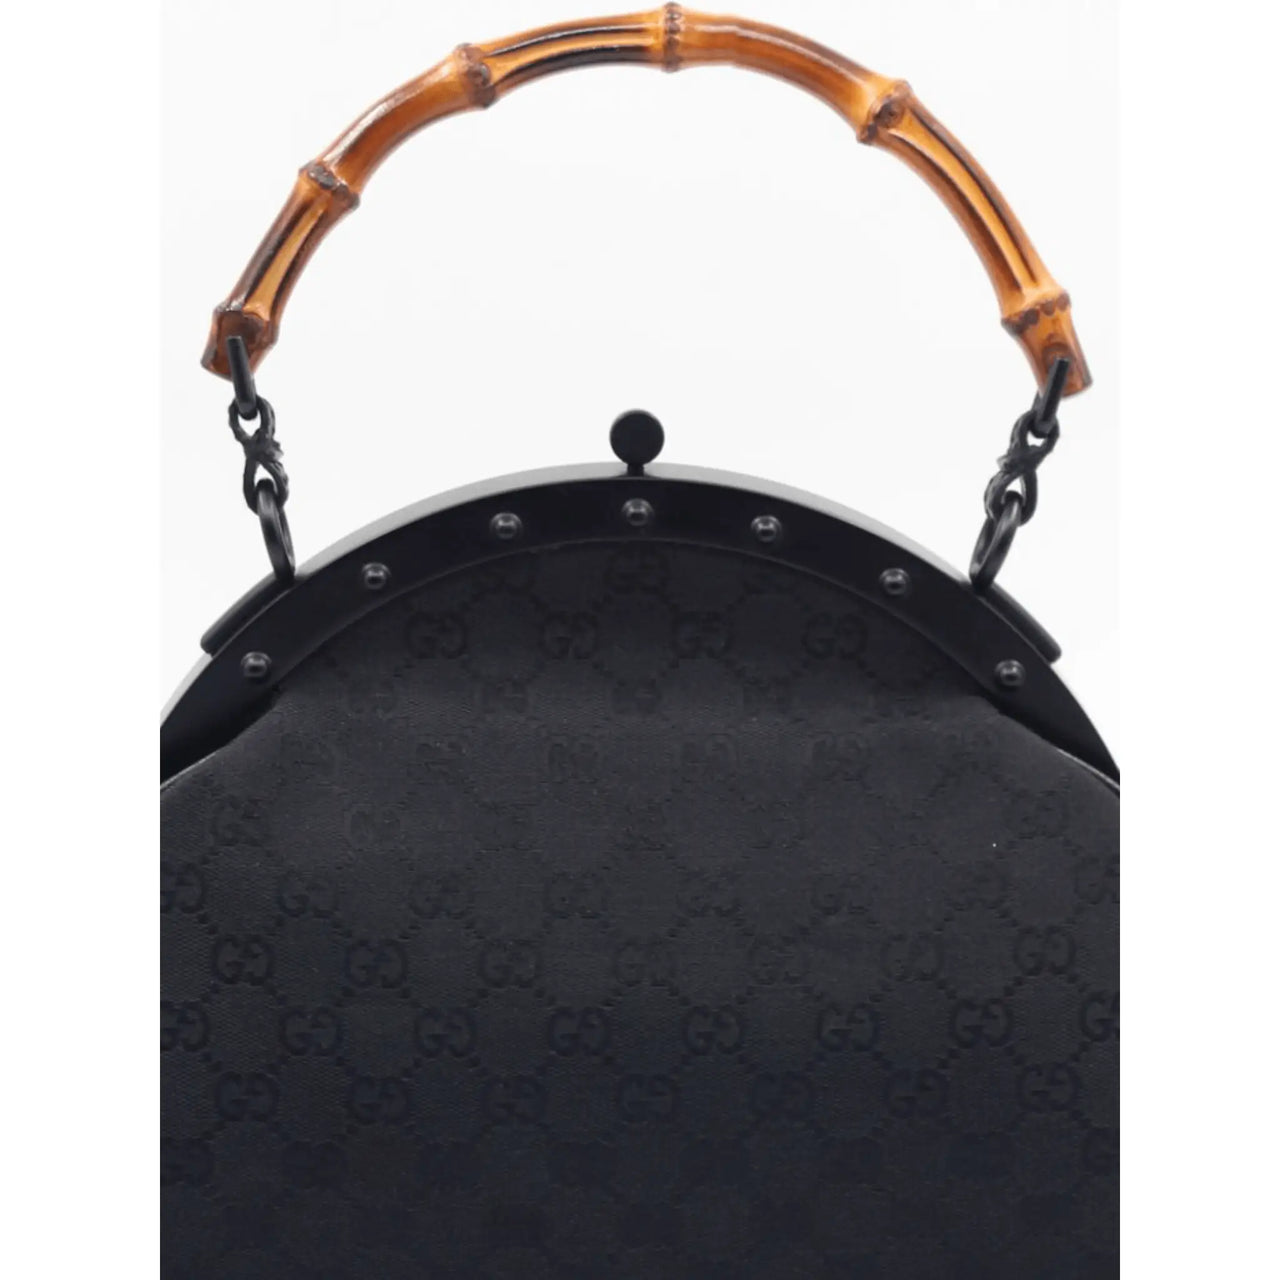 Gucci Diana small tote bamboo handles – A Piece Lux